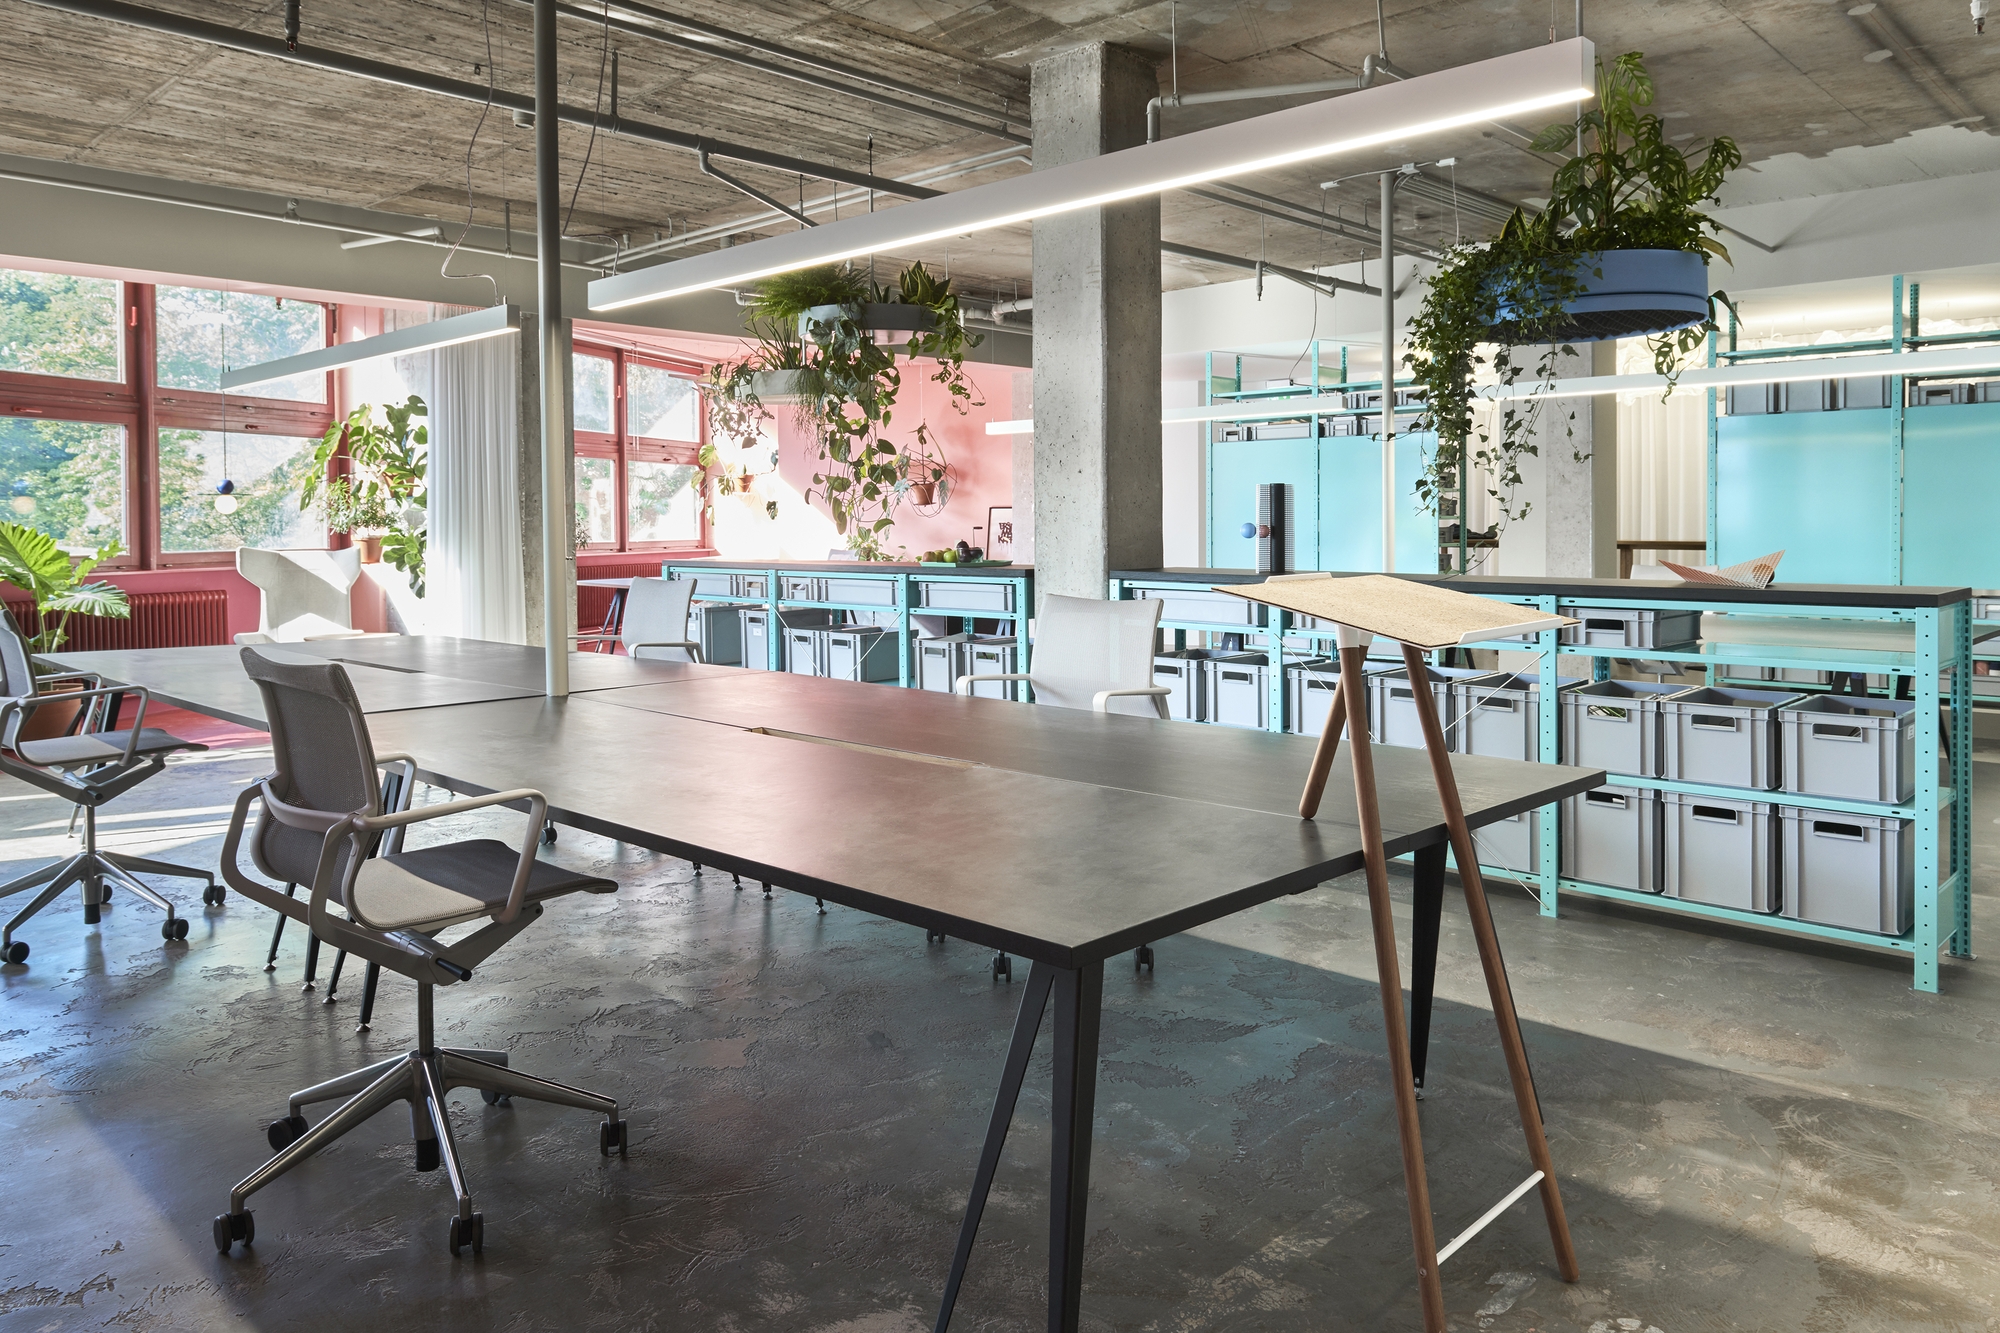 the distinctive appearance of concrete furniture in industrial workplaces